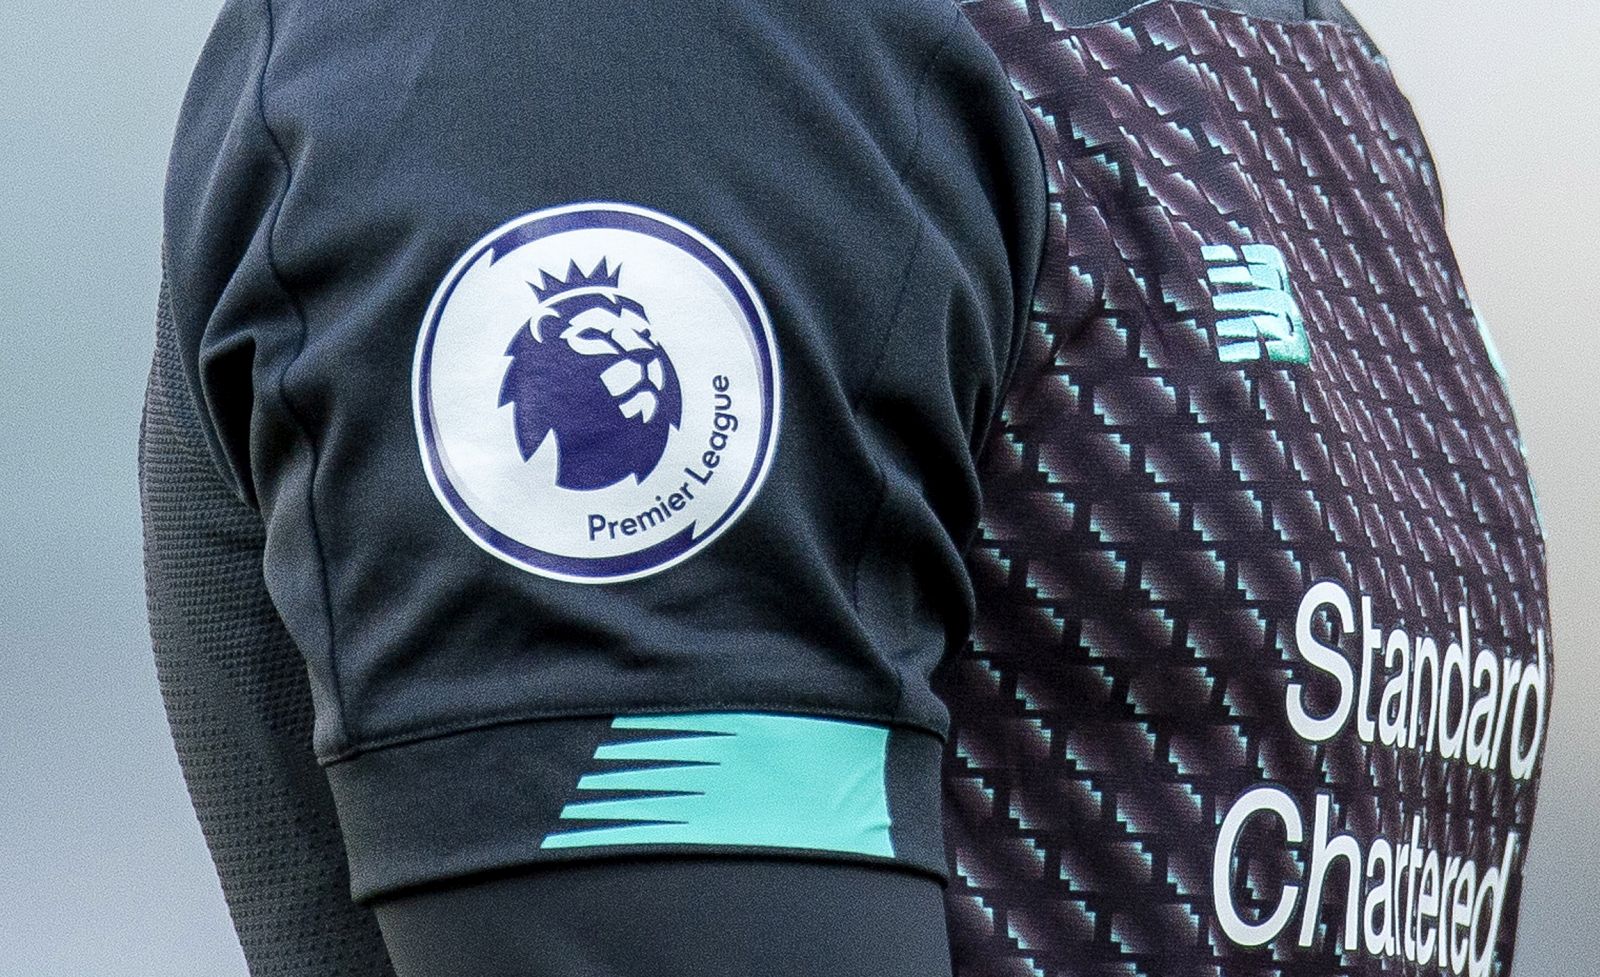 epa09641370 (FILE) - The Premier League logo can be seen on the sleeves of Liverpool's Alex Oxlade-Chamberlain during the English Premier League soccer match between Burnley FC and Liverpool FC in Burnley, Britain, 31 August 2019 (re-issued on 14 December 2021). The English Premier League on 14 December 2021 reported that 42 players and staff members have been tested positive for the coronavirus COVID-19 disease over a seven-day period.  EPA/PETER POWELL *** Local Caption *** 56115052